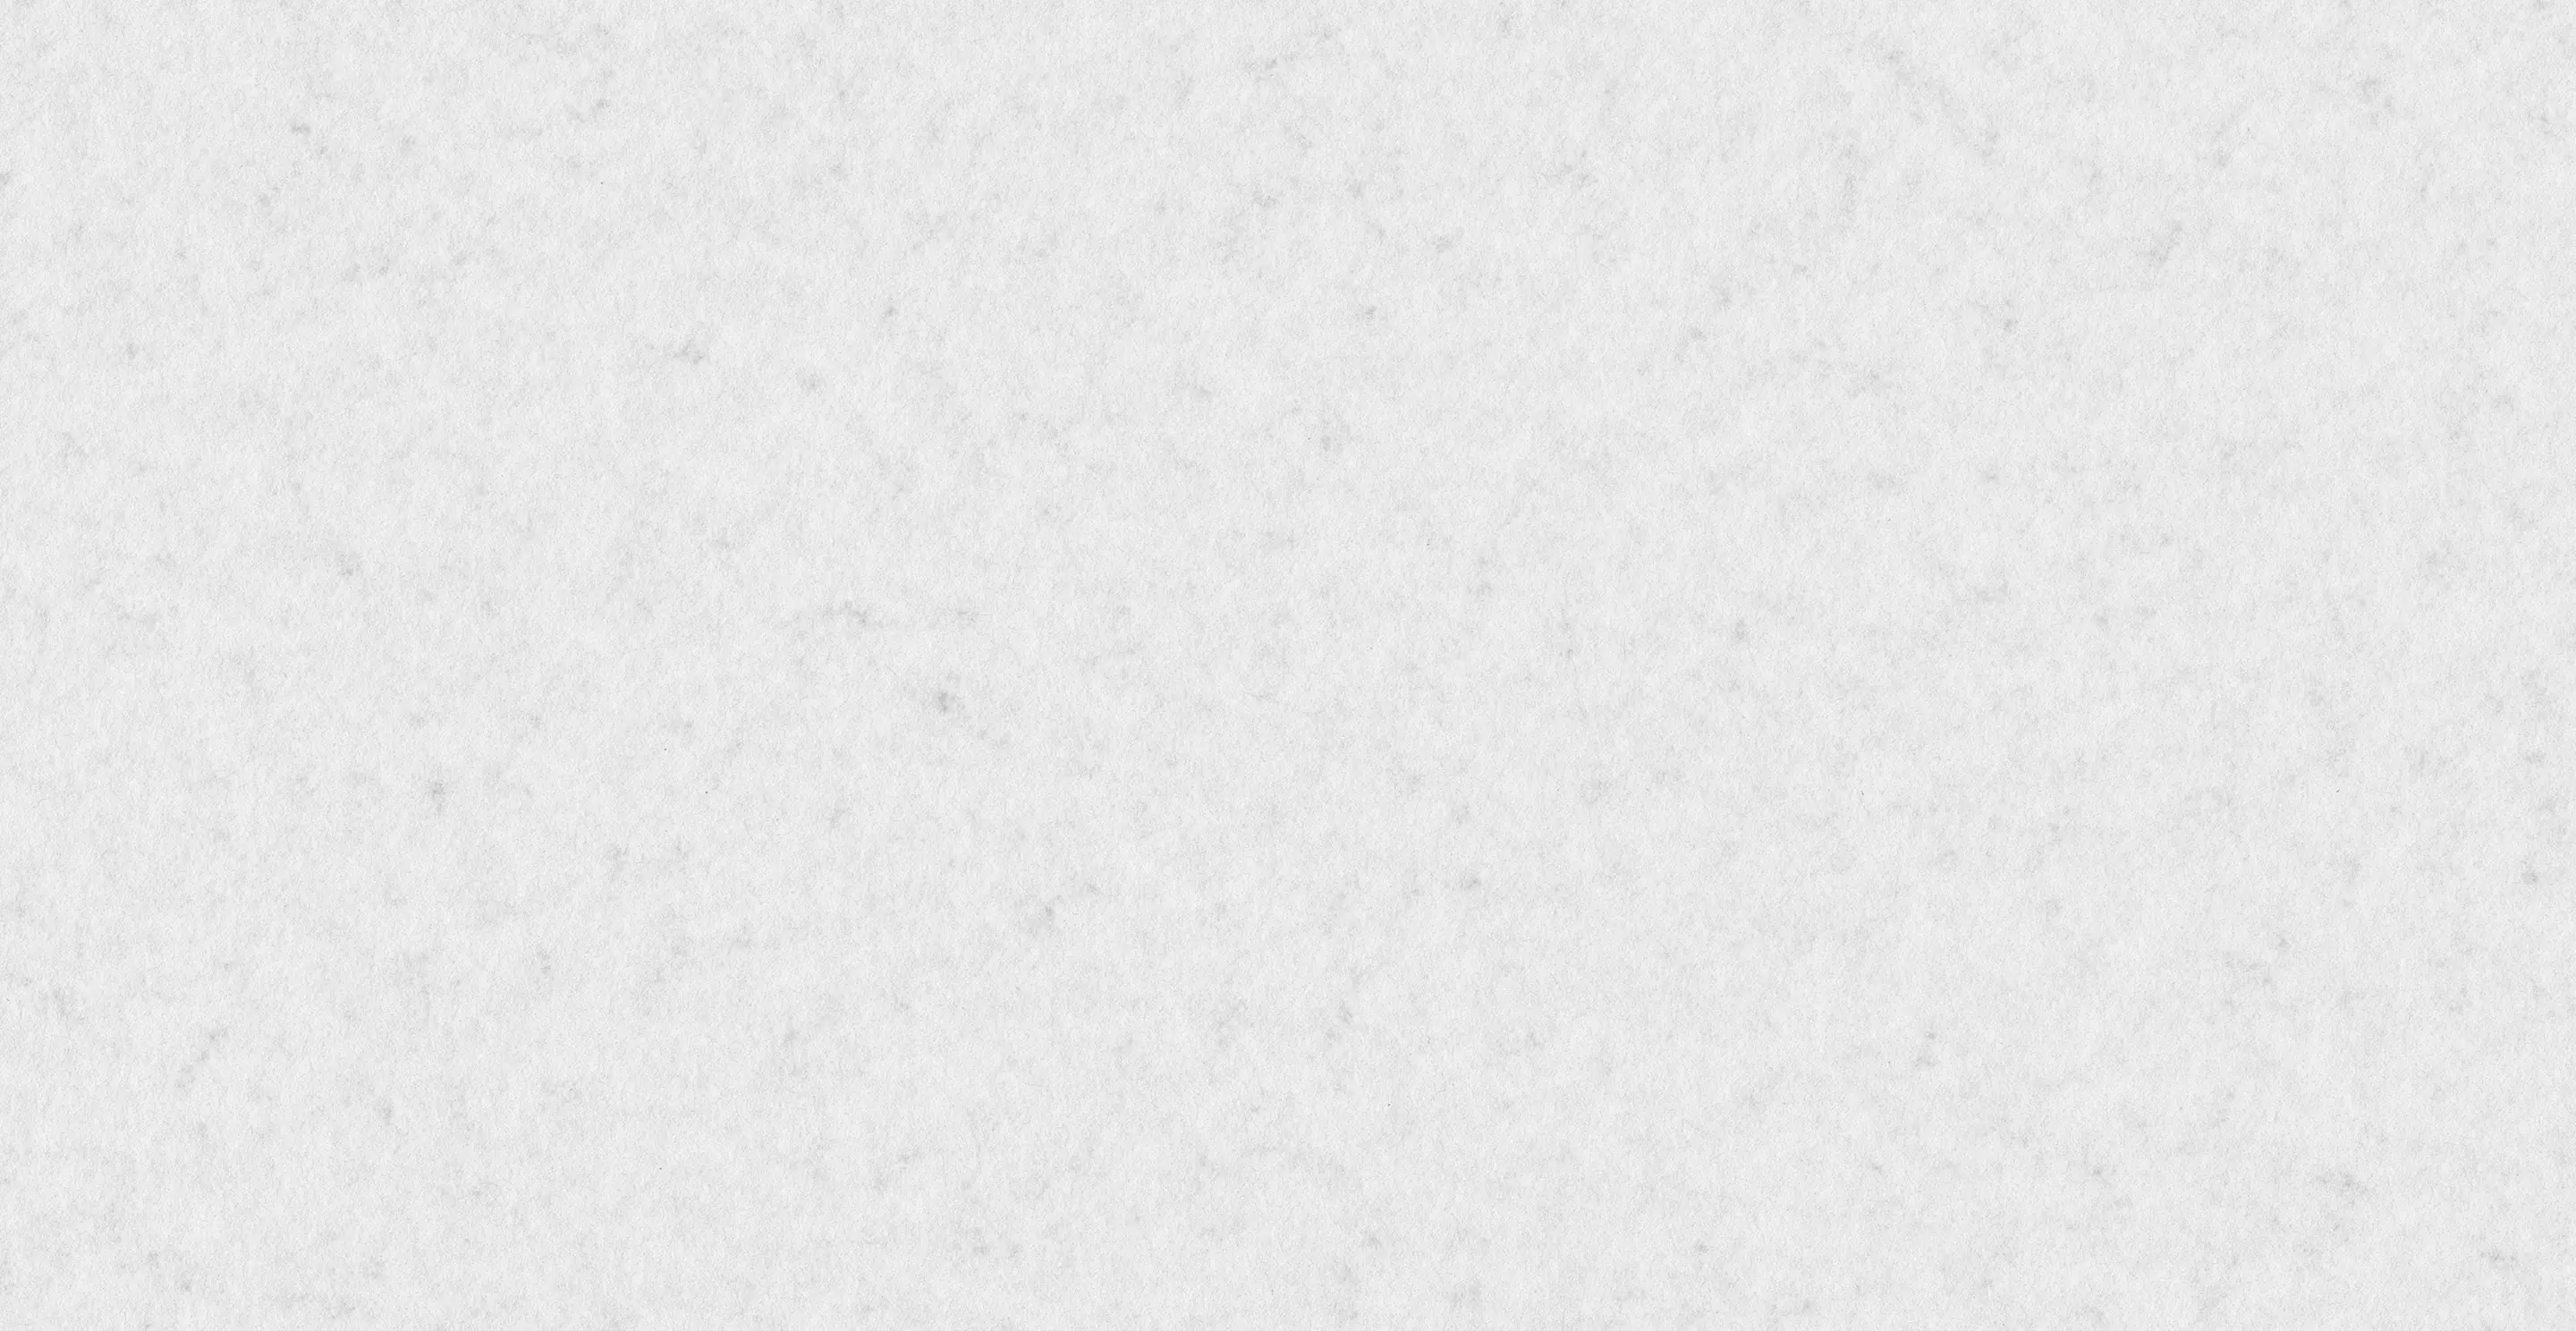 Soft gray paper texture background.